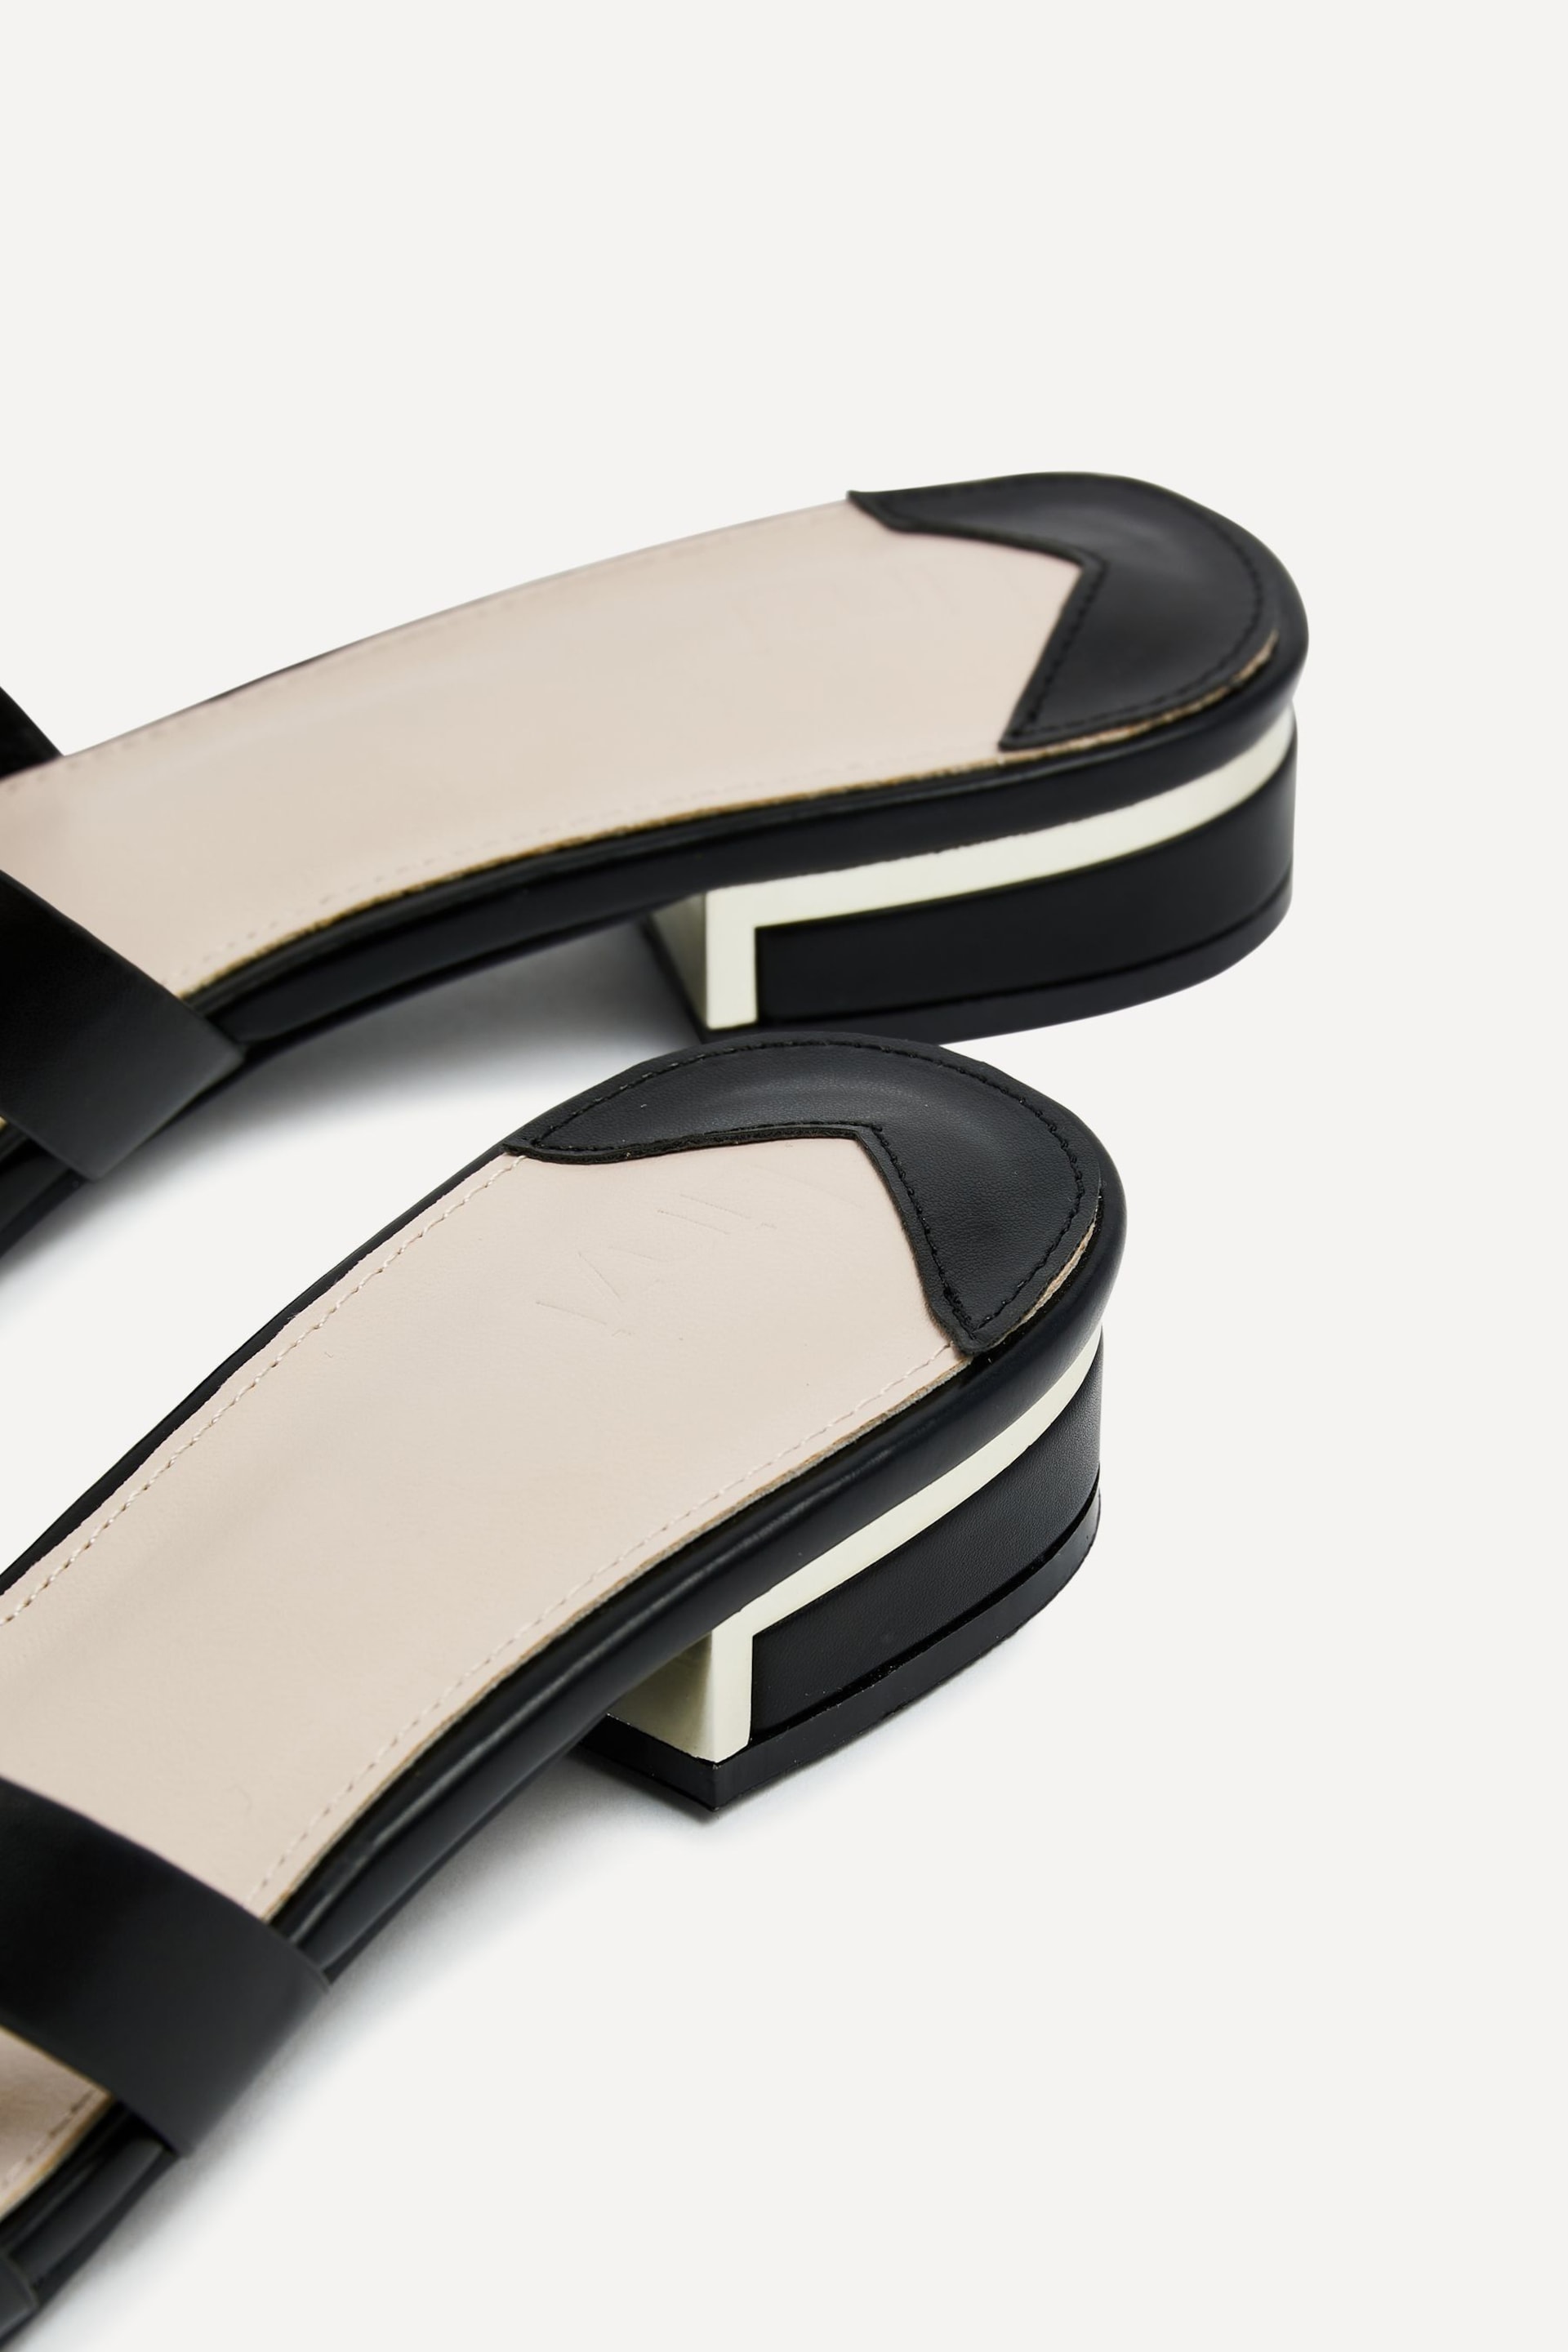 Linzi Black Gallery Low Heeled Sandals With Gold Trim - Image 3 of 3